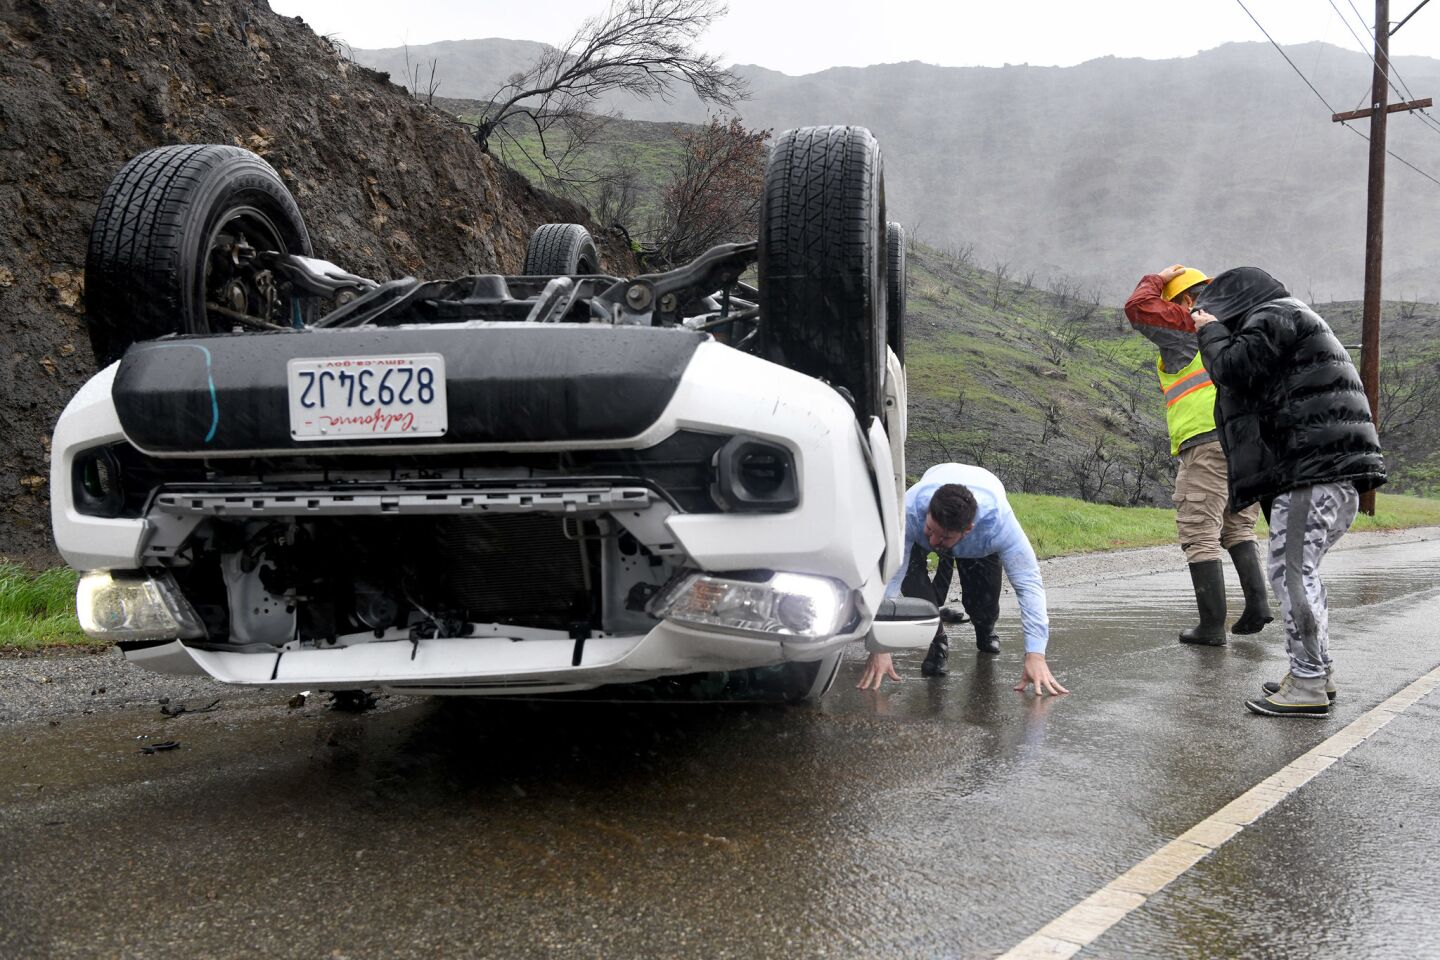 Powerful storm moves into Southern California